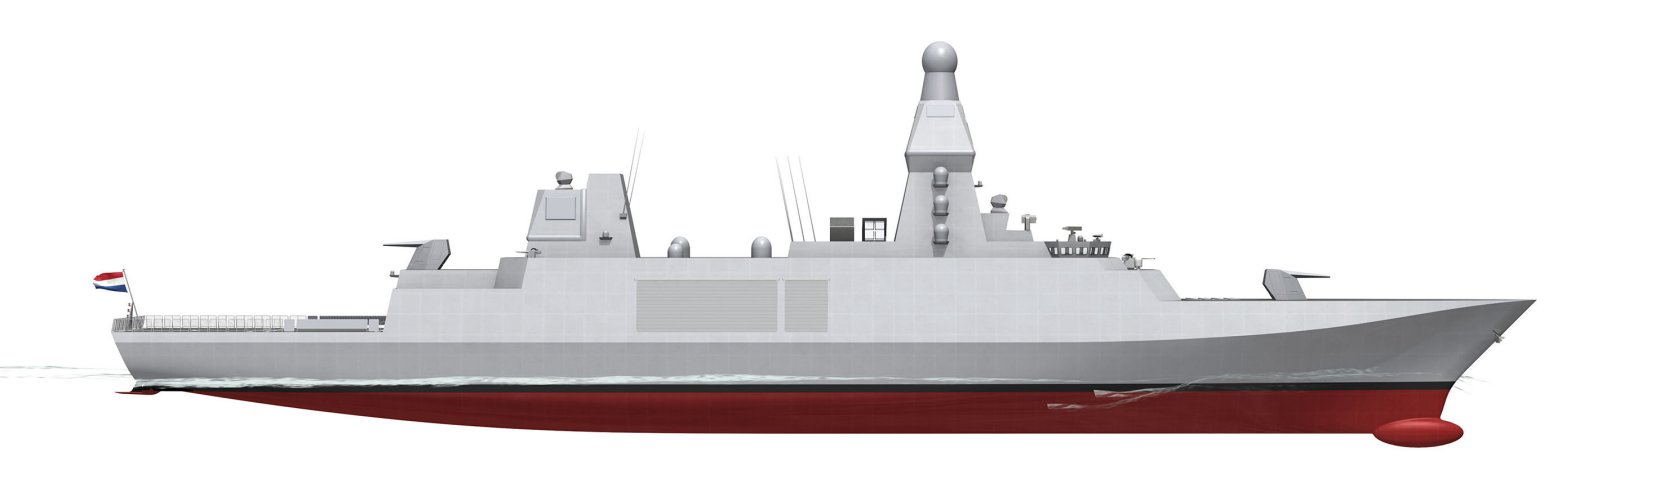 The DMO and Thales announced on 28 February that they are developing the AWWS for RNLN and Belgian navy M-frigates. (DMO)